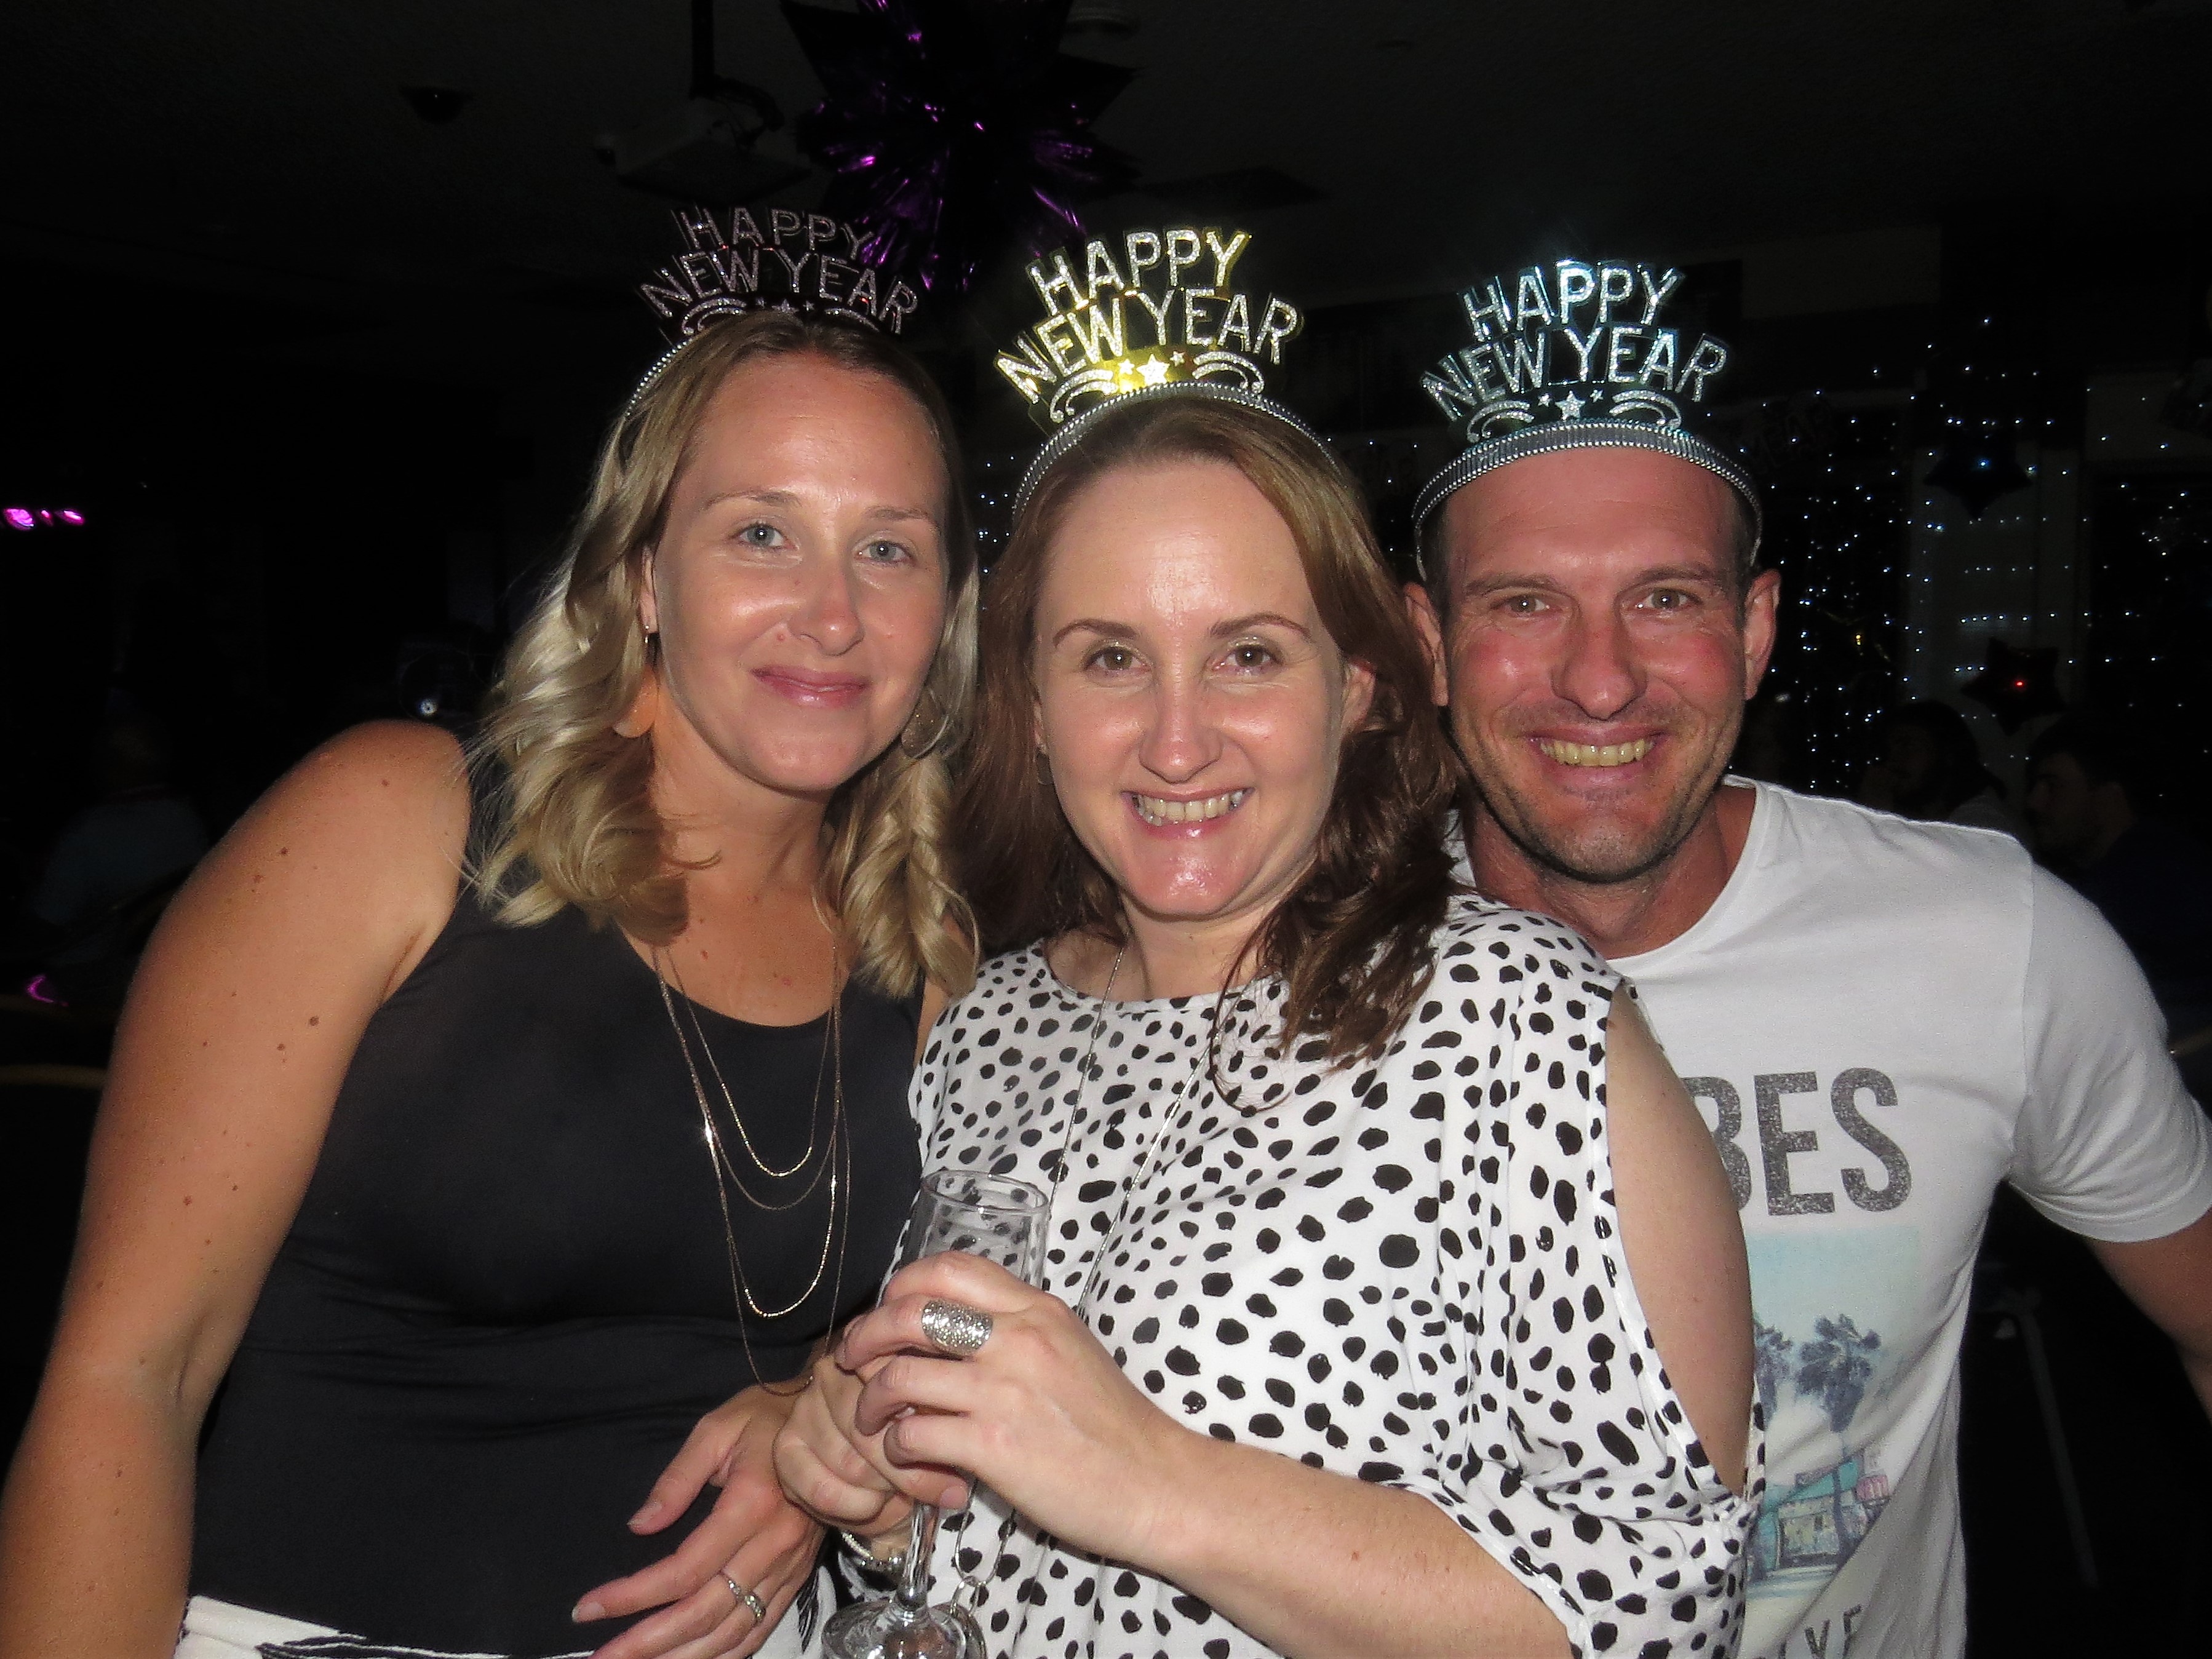 Stacey Hoare, Kirsty Harvey and Darren Carrall ring in the New Year at Bulahdelah Bowling Club.